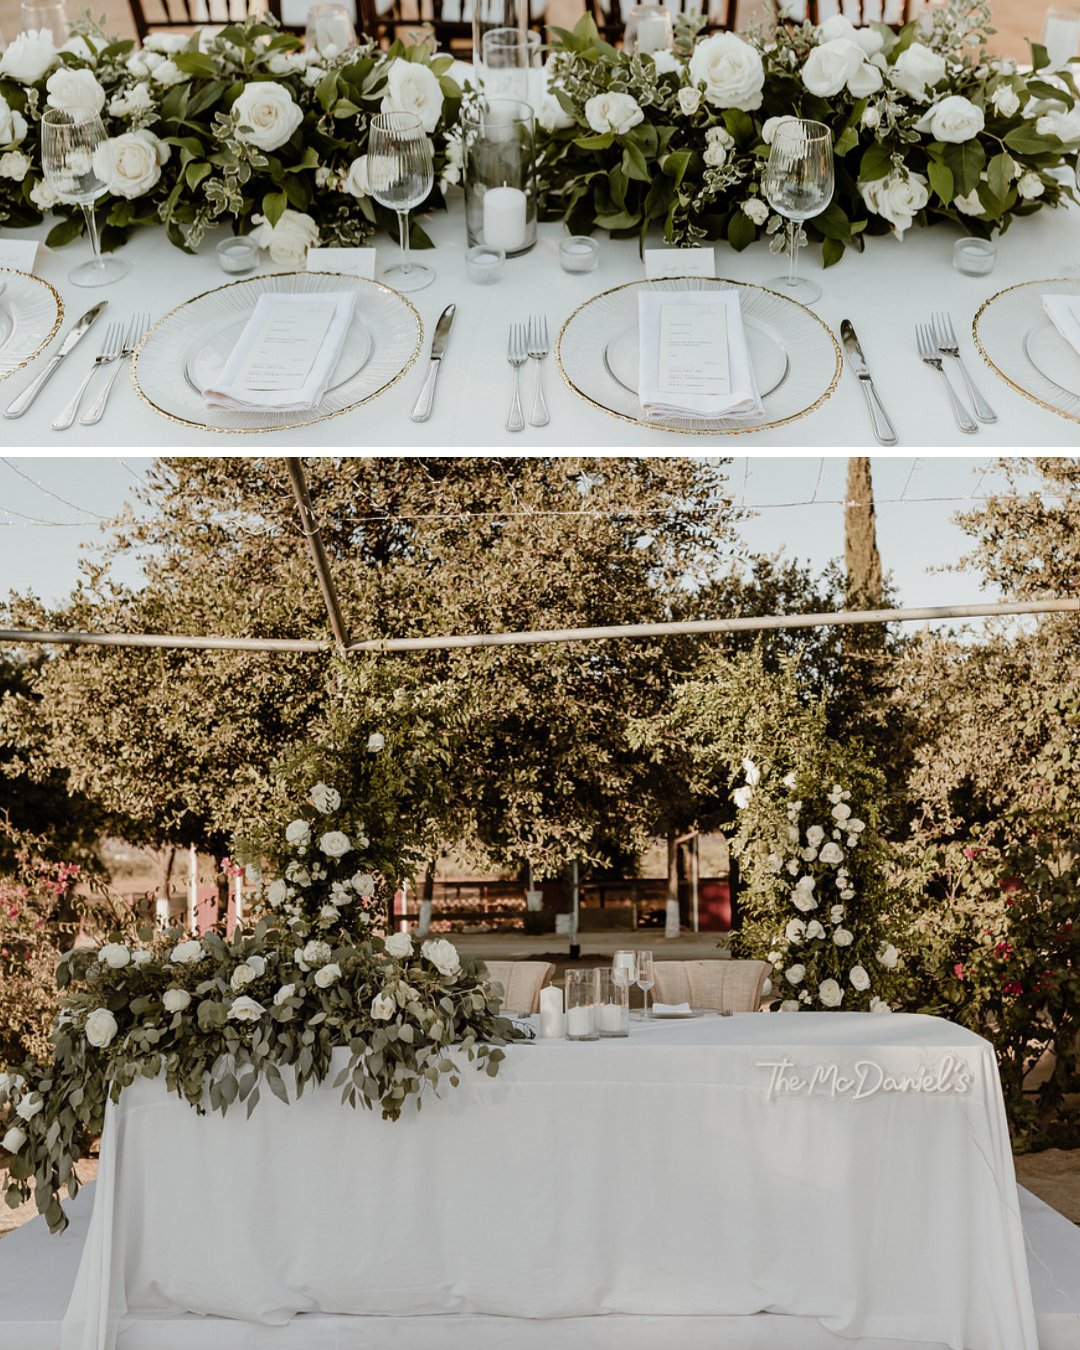 table setup with white roses and candles as decor